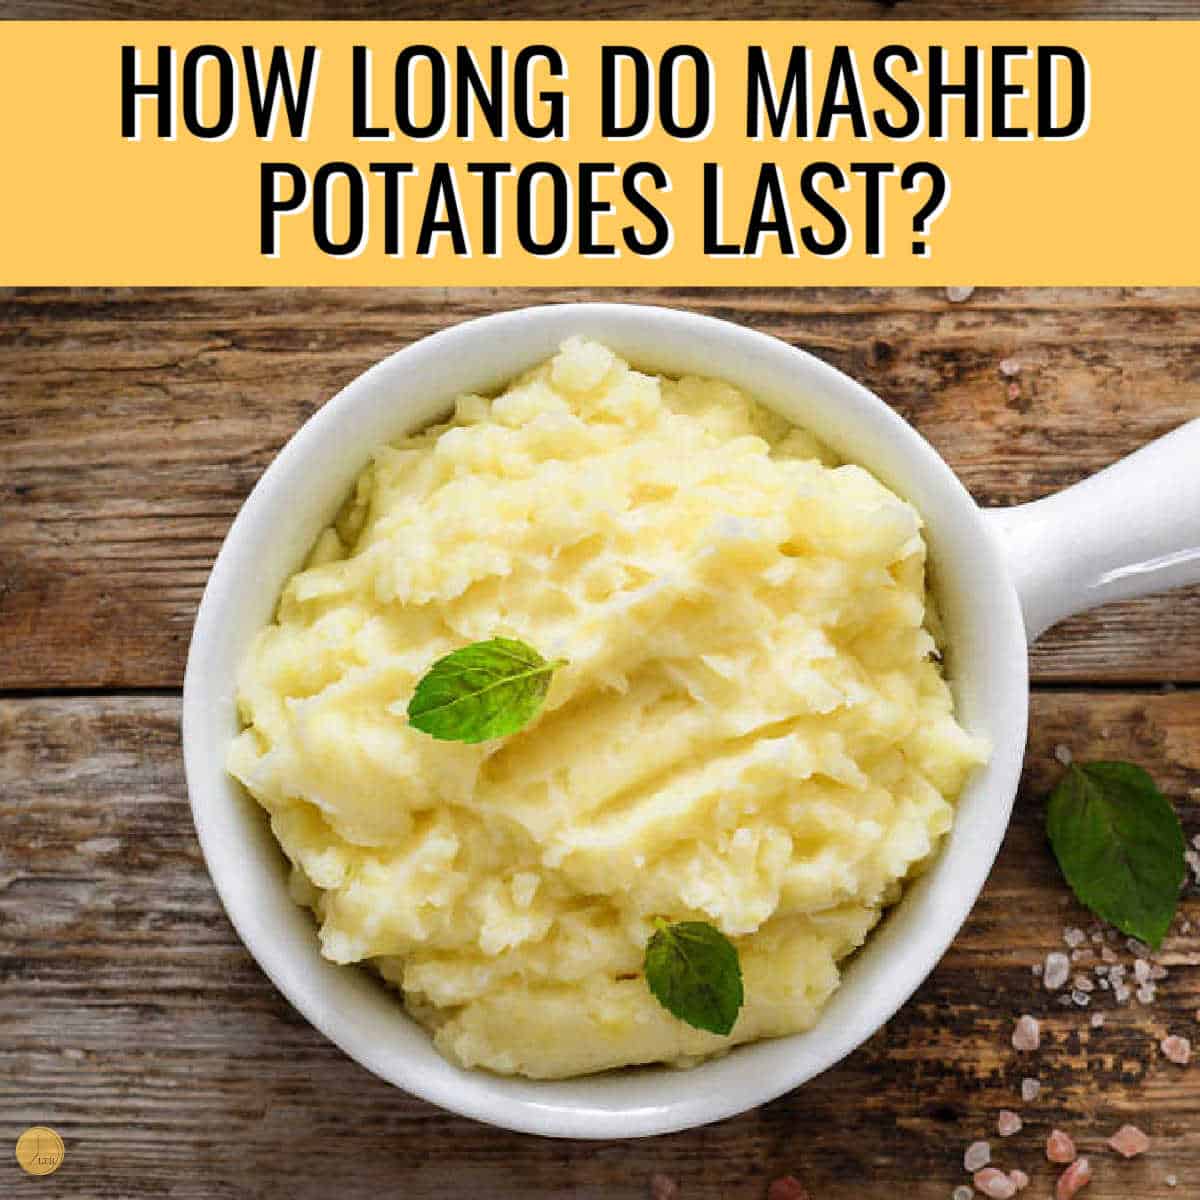 bowl of potatoes with yellow banner and text "how long do mashed potatoes last?"